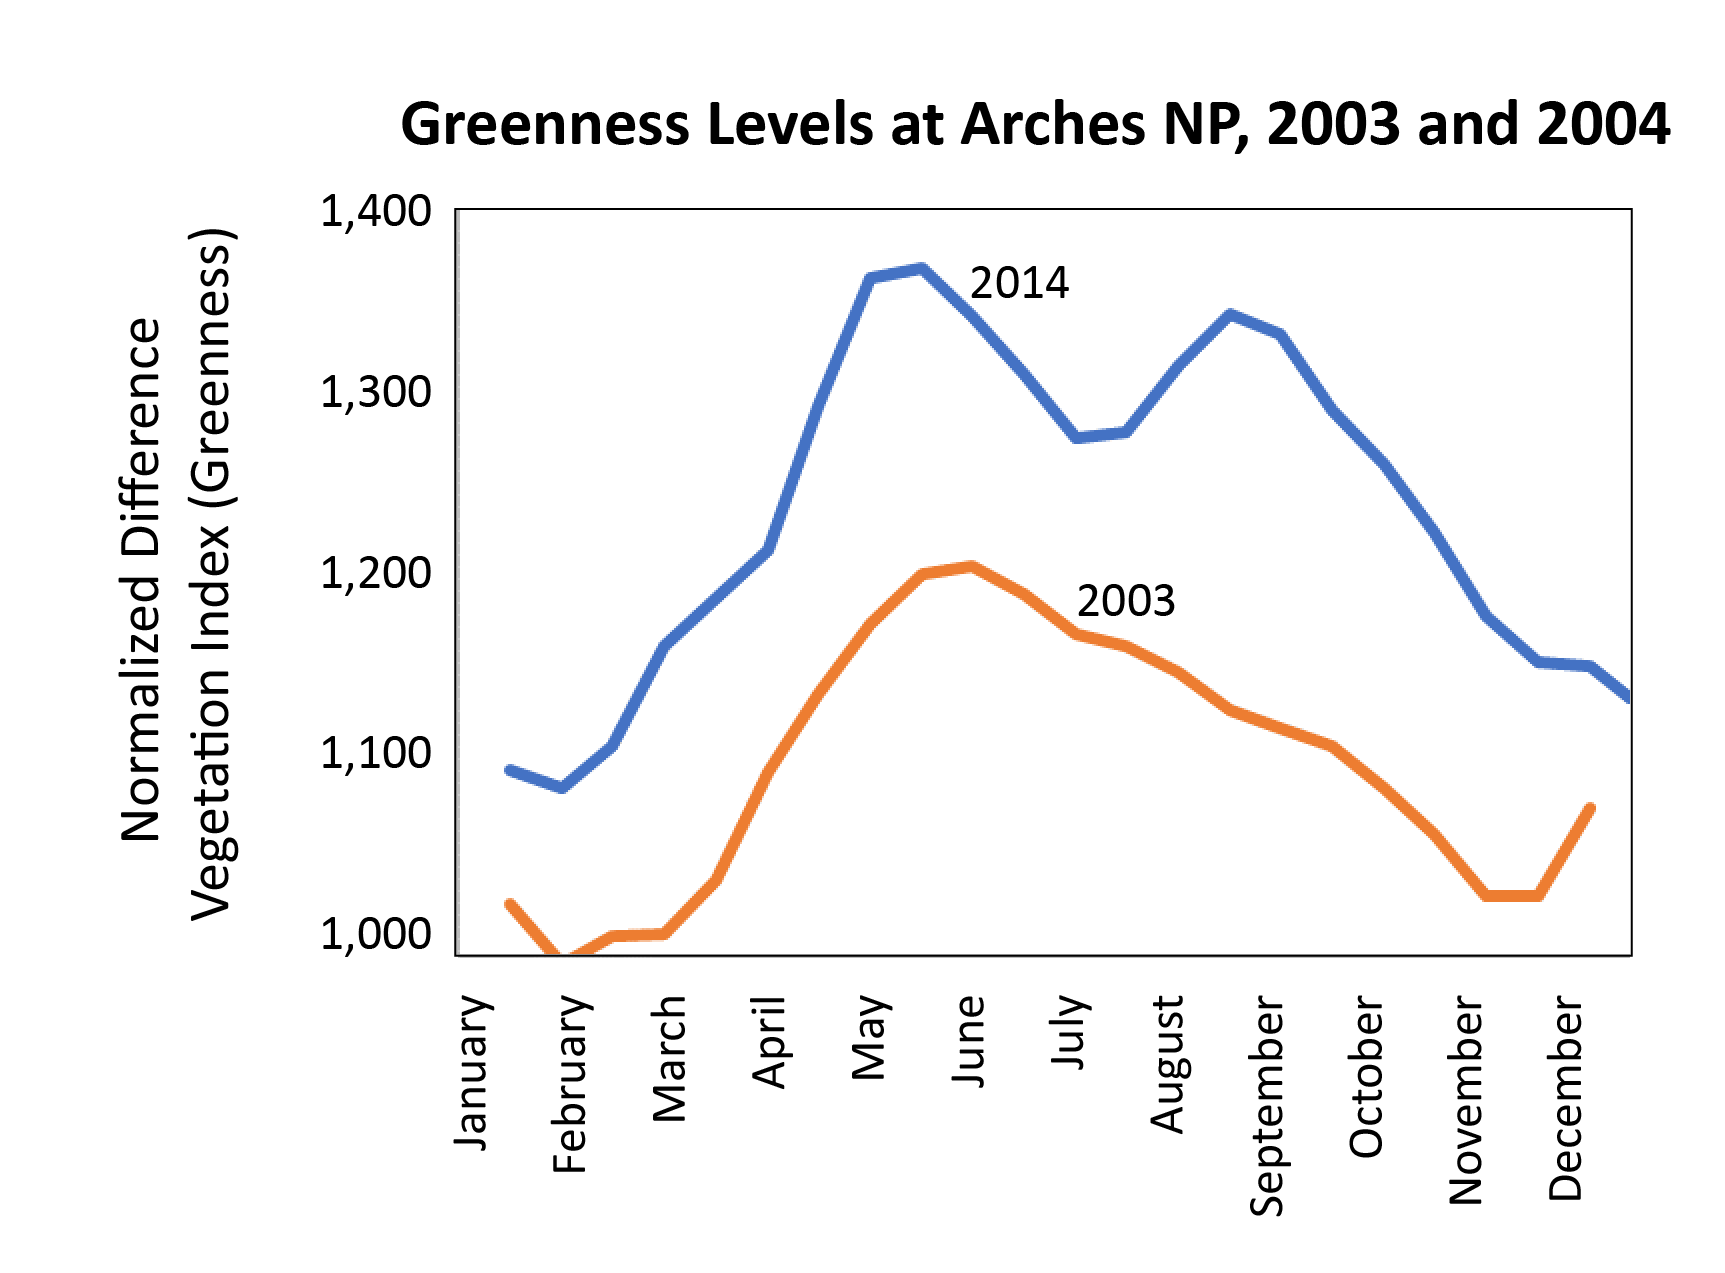 Line graph showing level of "greenness" across the months for two different years.